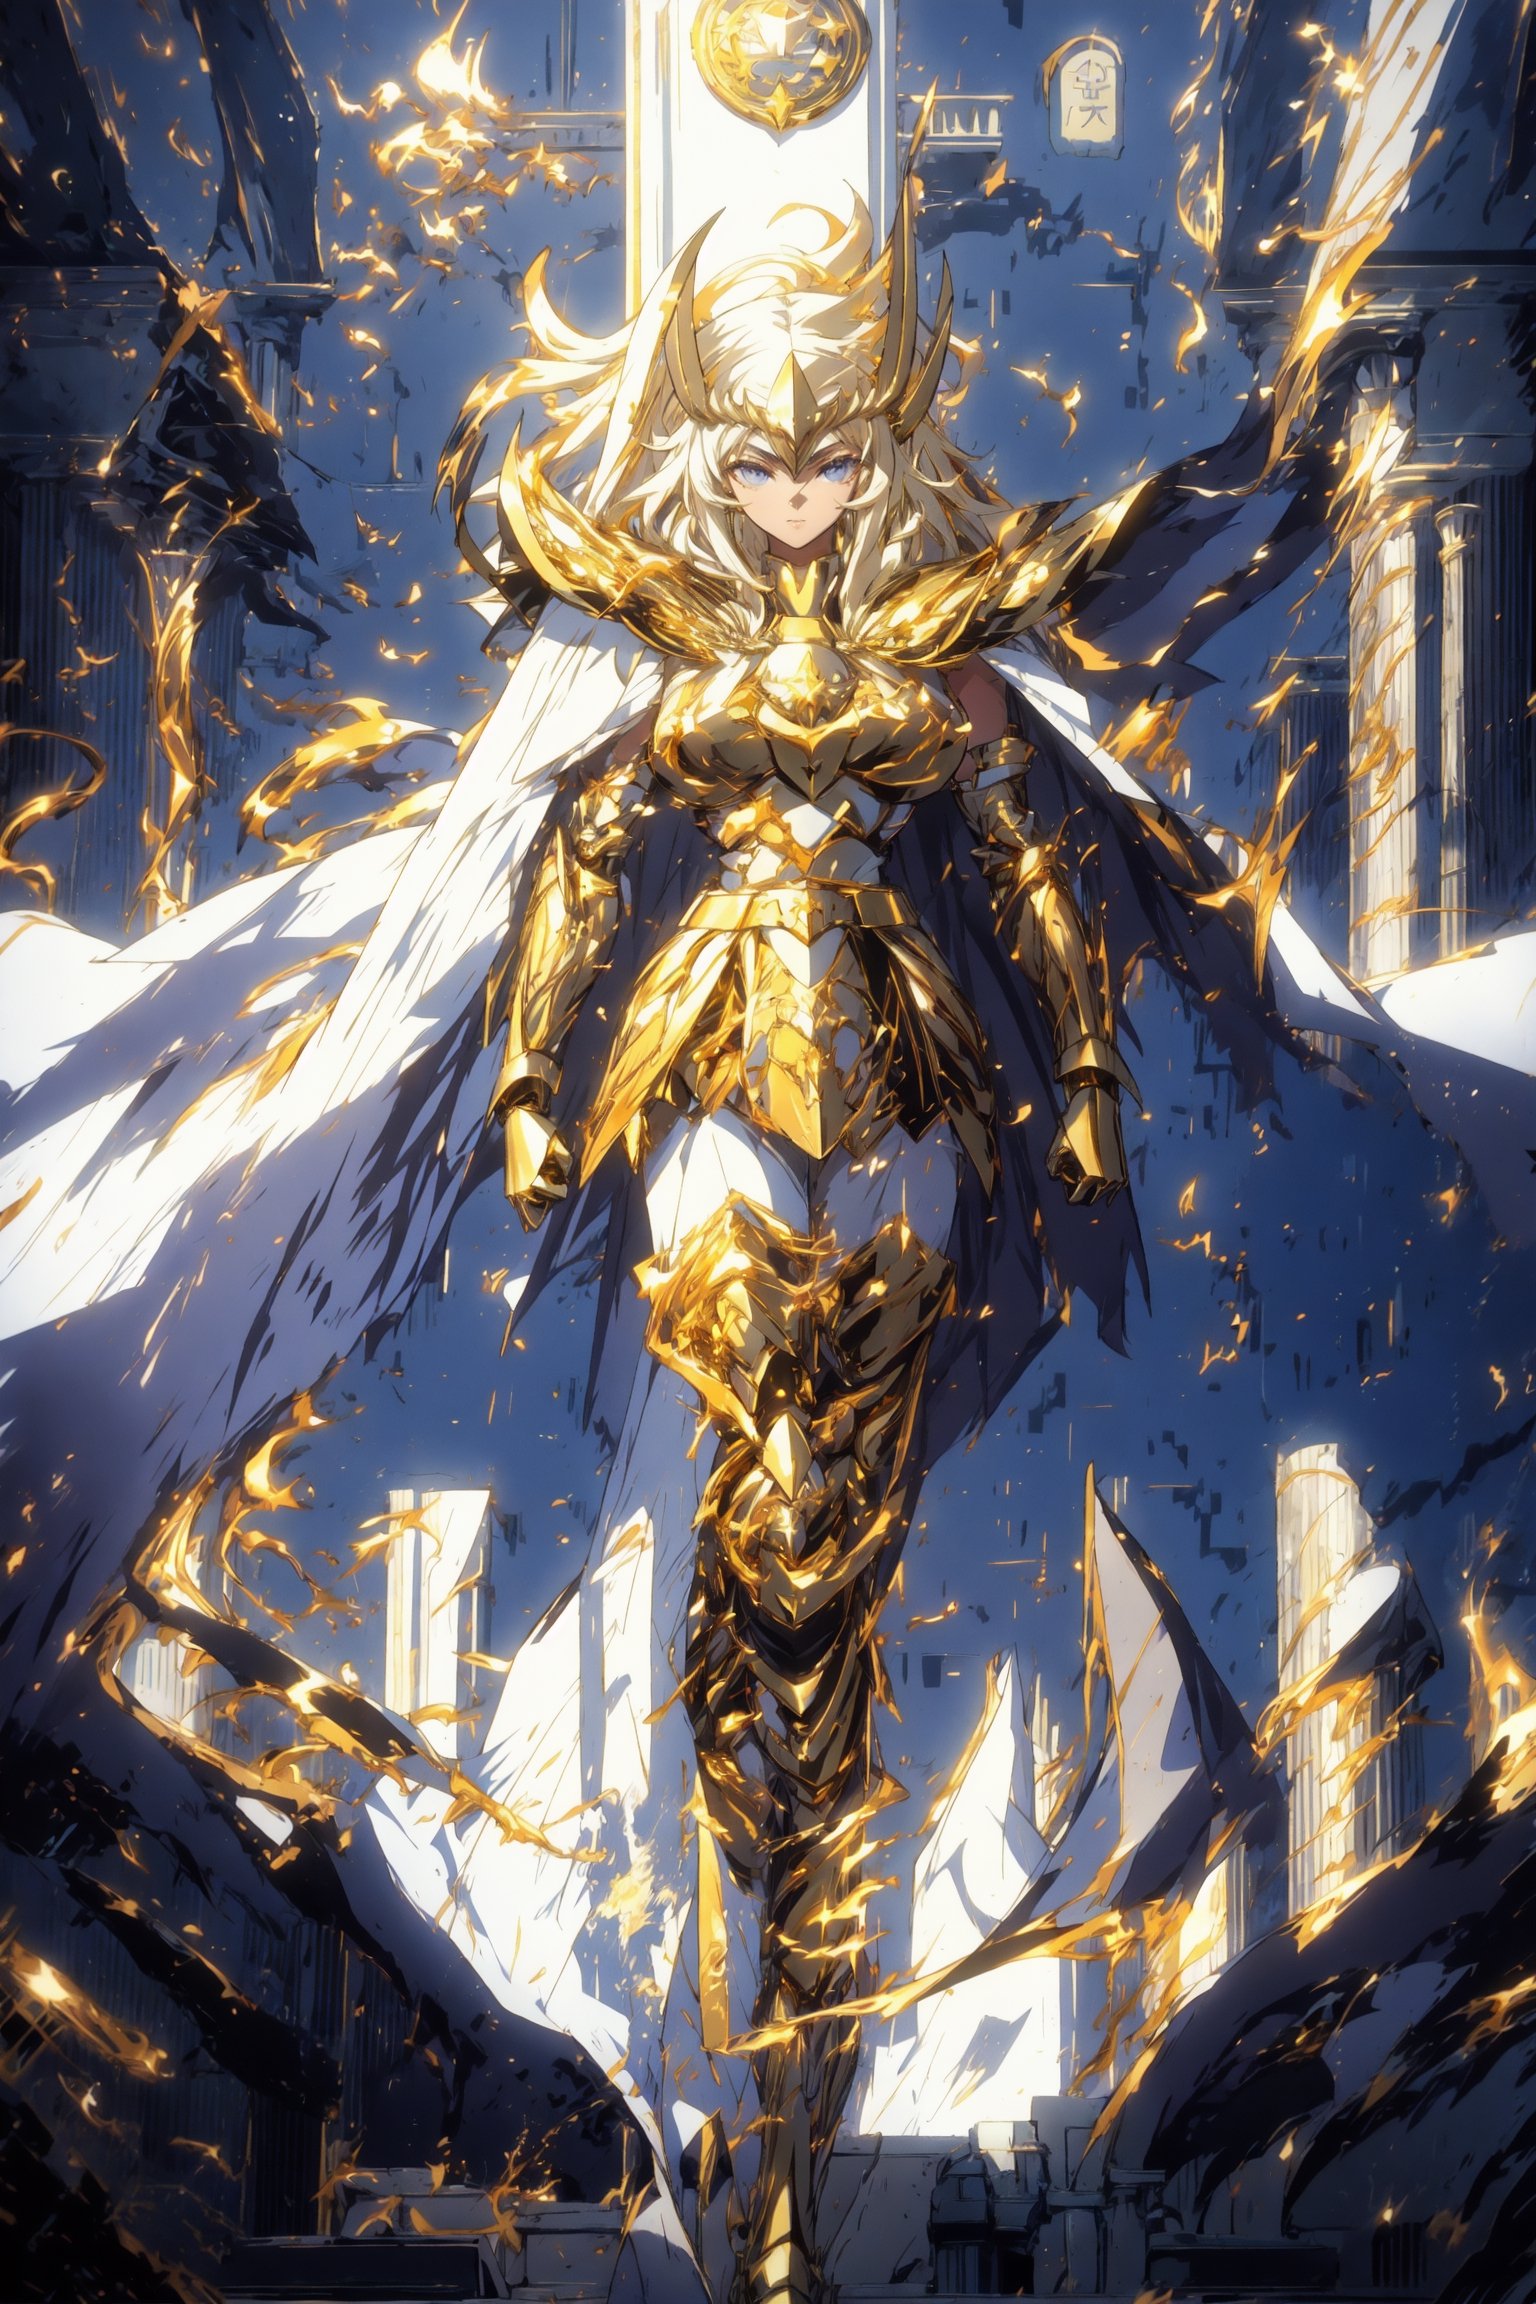 absurdres, highres, ultra detailed,Insane detail in face,  (nsfw, girl,  big breasts), Gold Saint, Saint Seiya Style, (((Gold Armor))), Full body armor, no helmet, Zodiac Knights, (((white long cape))), black hair, Asian Fighting style pose, gold gloves, long hair, long white cape, messy_hair, black eyes, full body armor, beautiful old greek temple in the background, full leg armor,,bg_imgs,  bare_shoulder,fantasy00d,r1ge